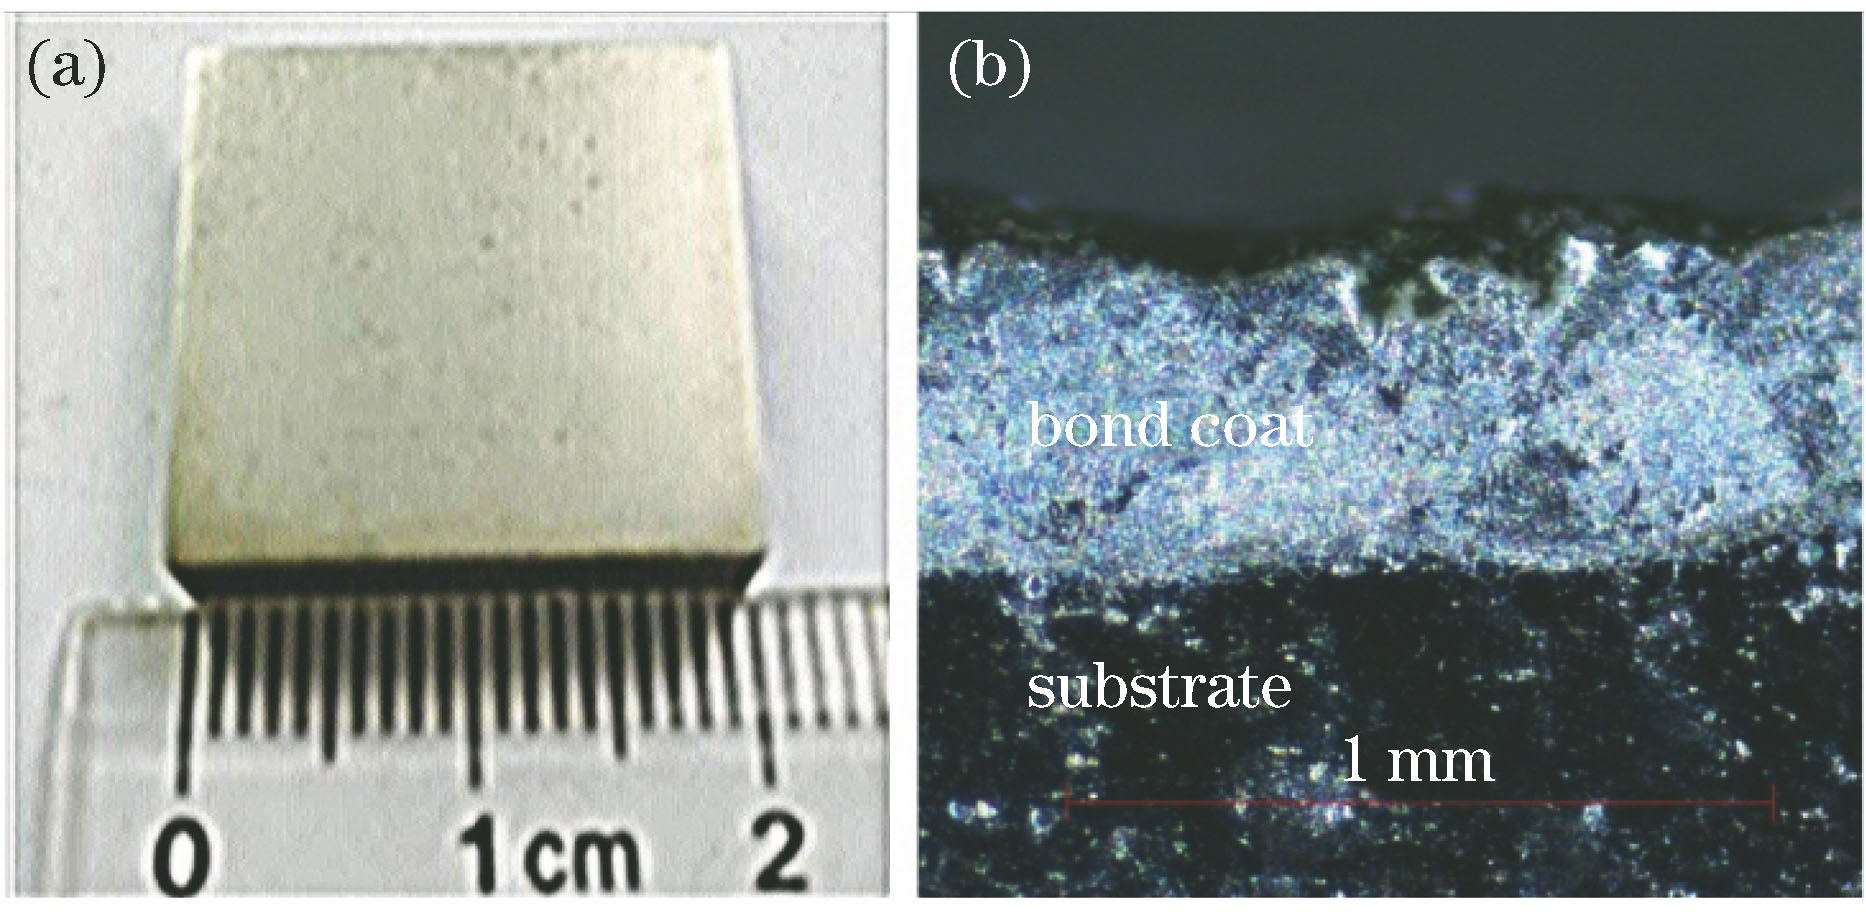 Bond coating layer fabricated by laser rapid prototyping. (a) Superficial photo; (b) cross sectional structure